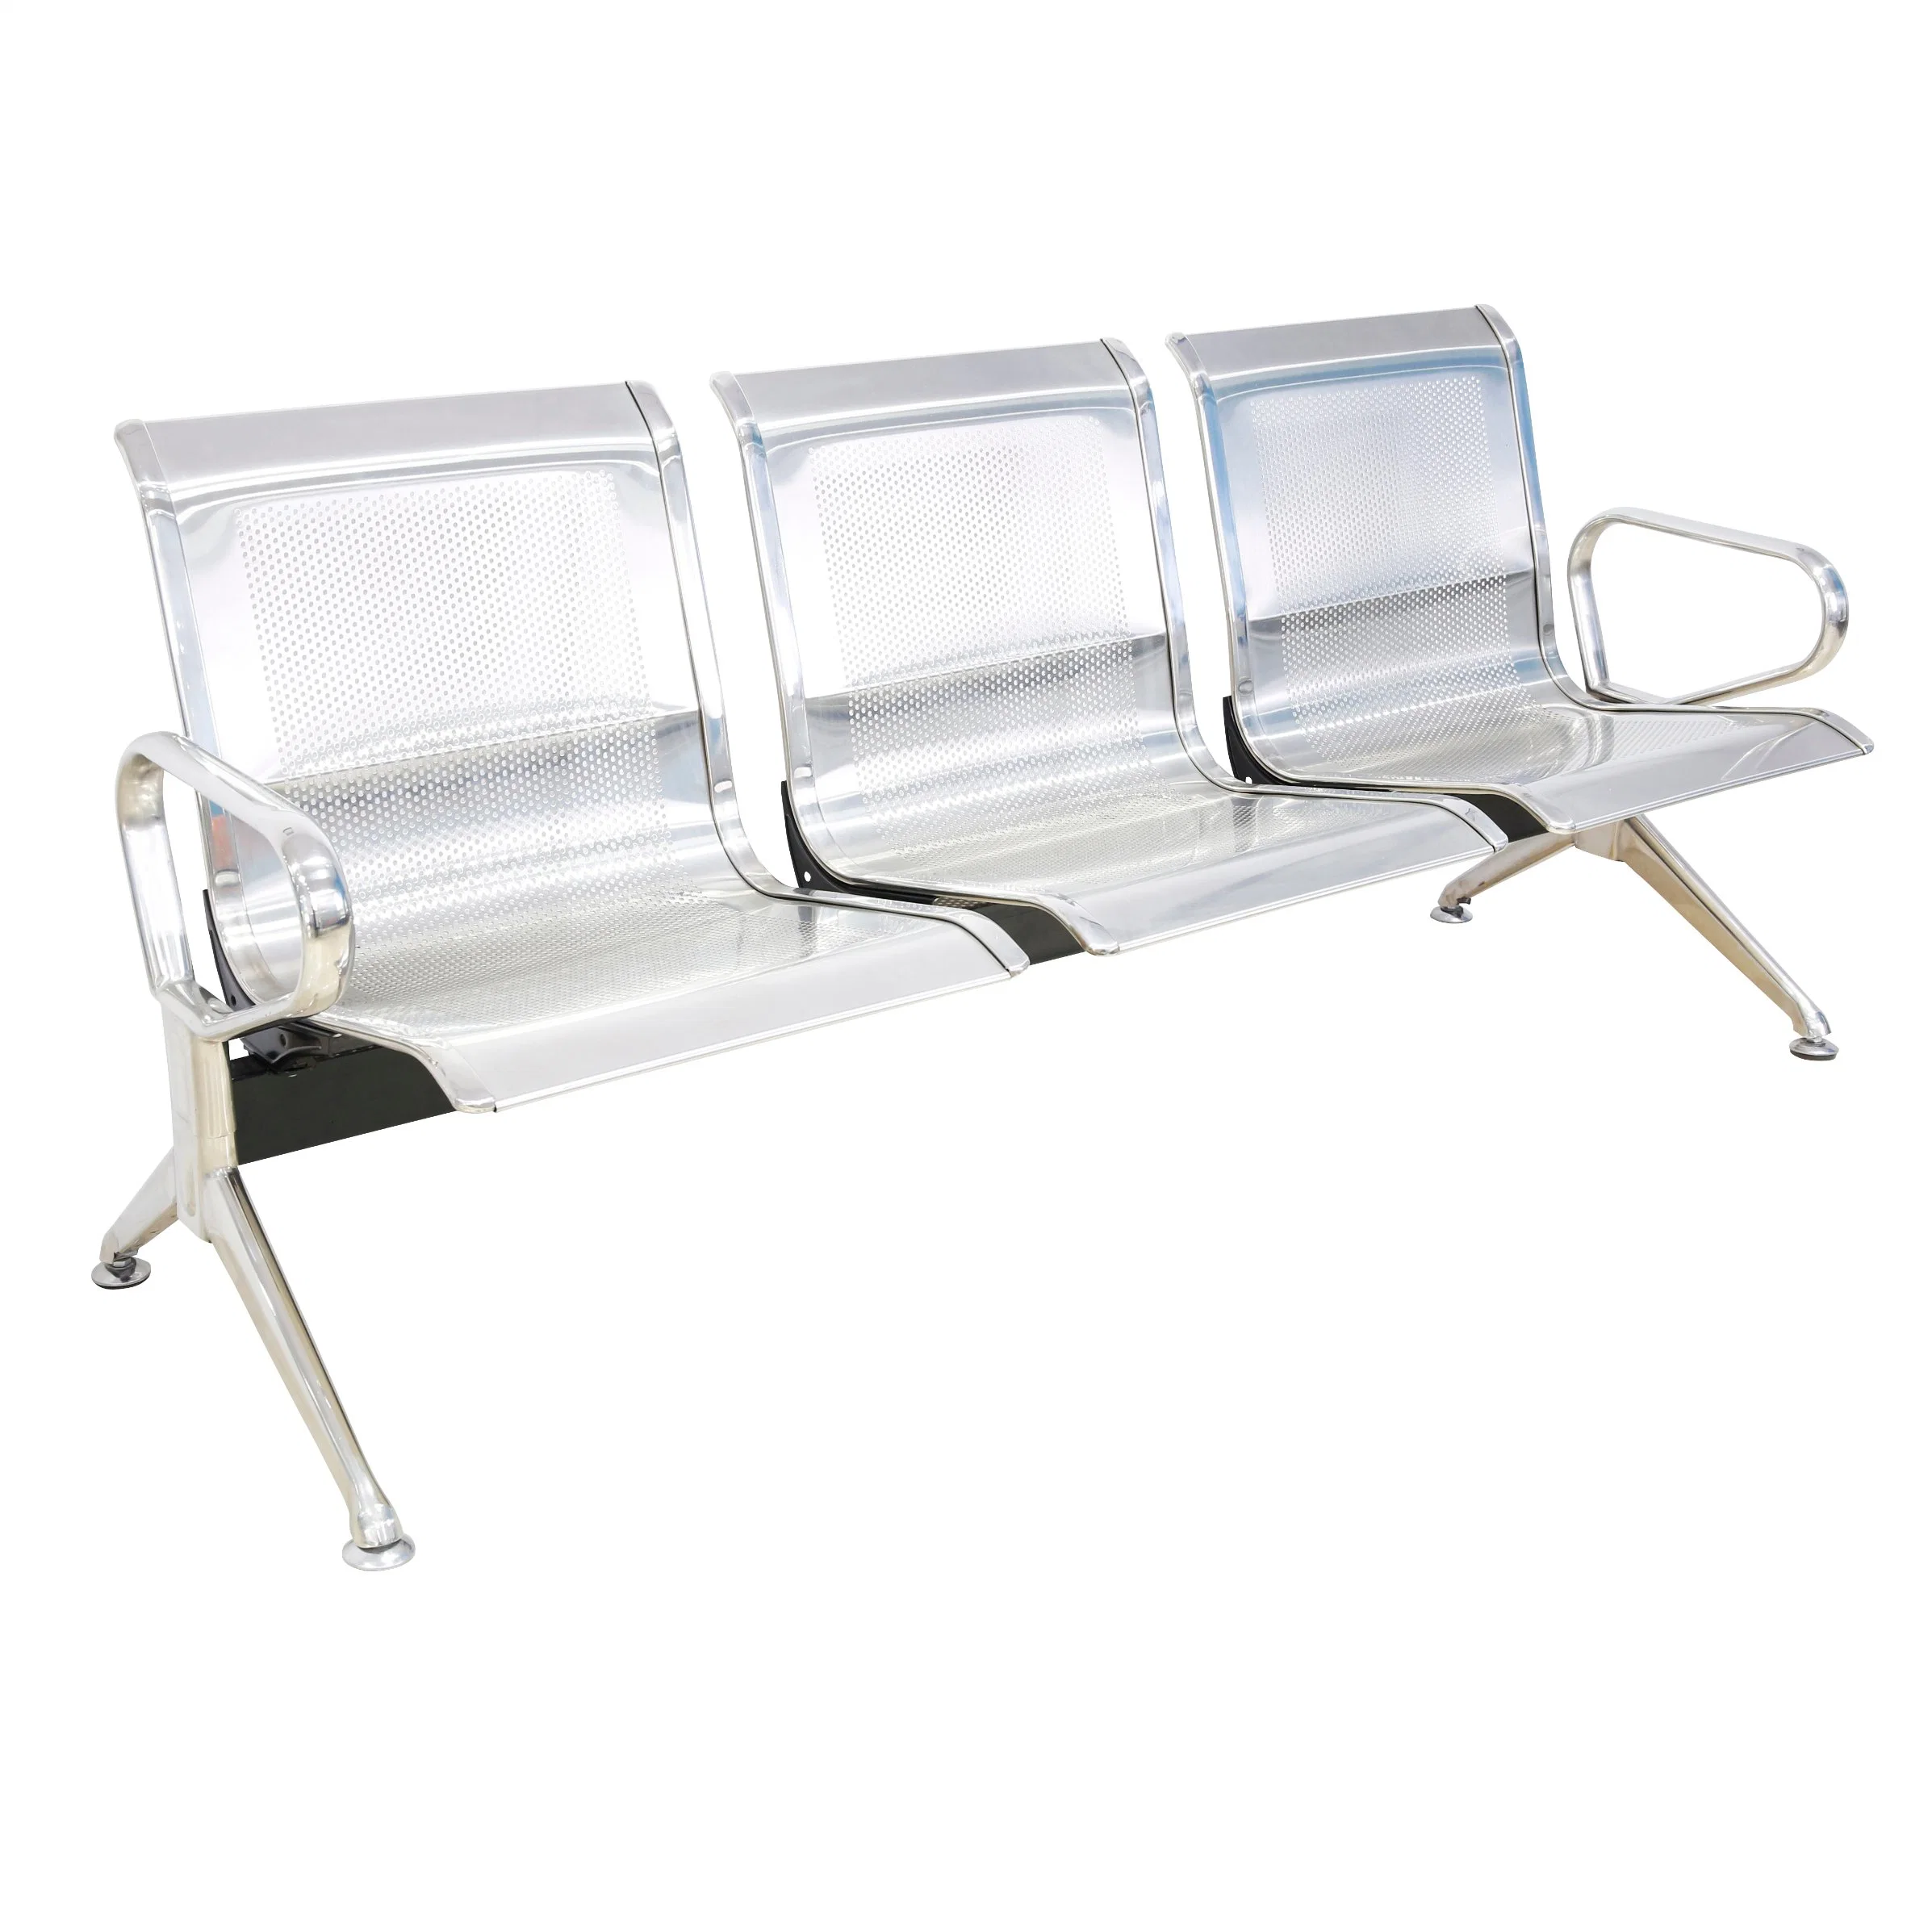 Public Waiting Room Leather Reception Furniture Manufacturer of 3 Seater Chair